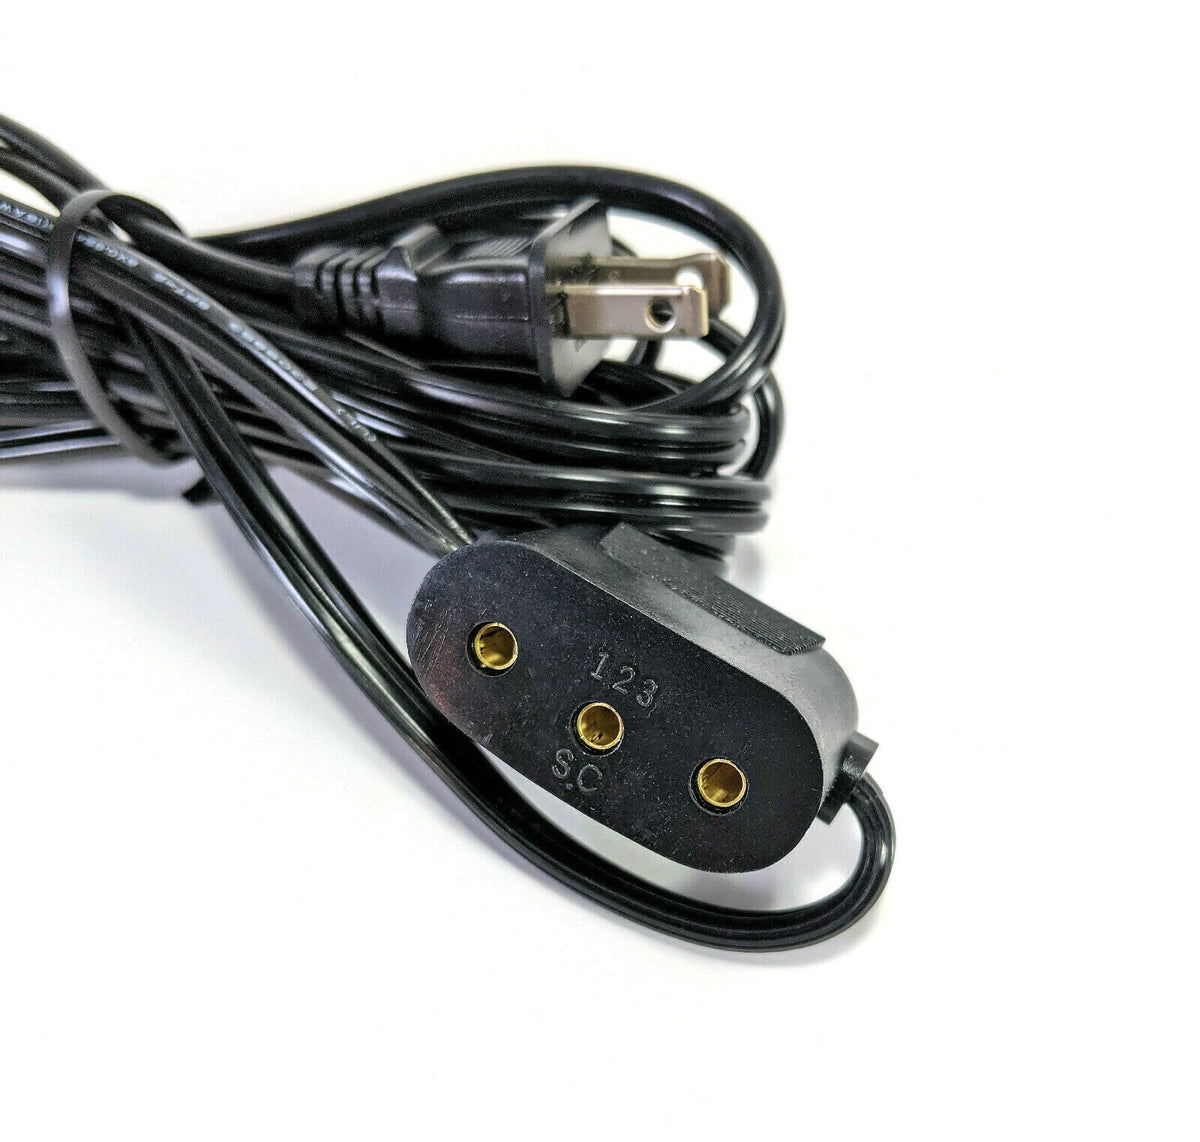 New Singer Sewing Machine Double Lead Foot Pedal Power Cord 221  Featherweight 15 99